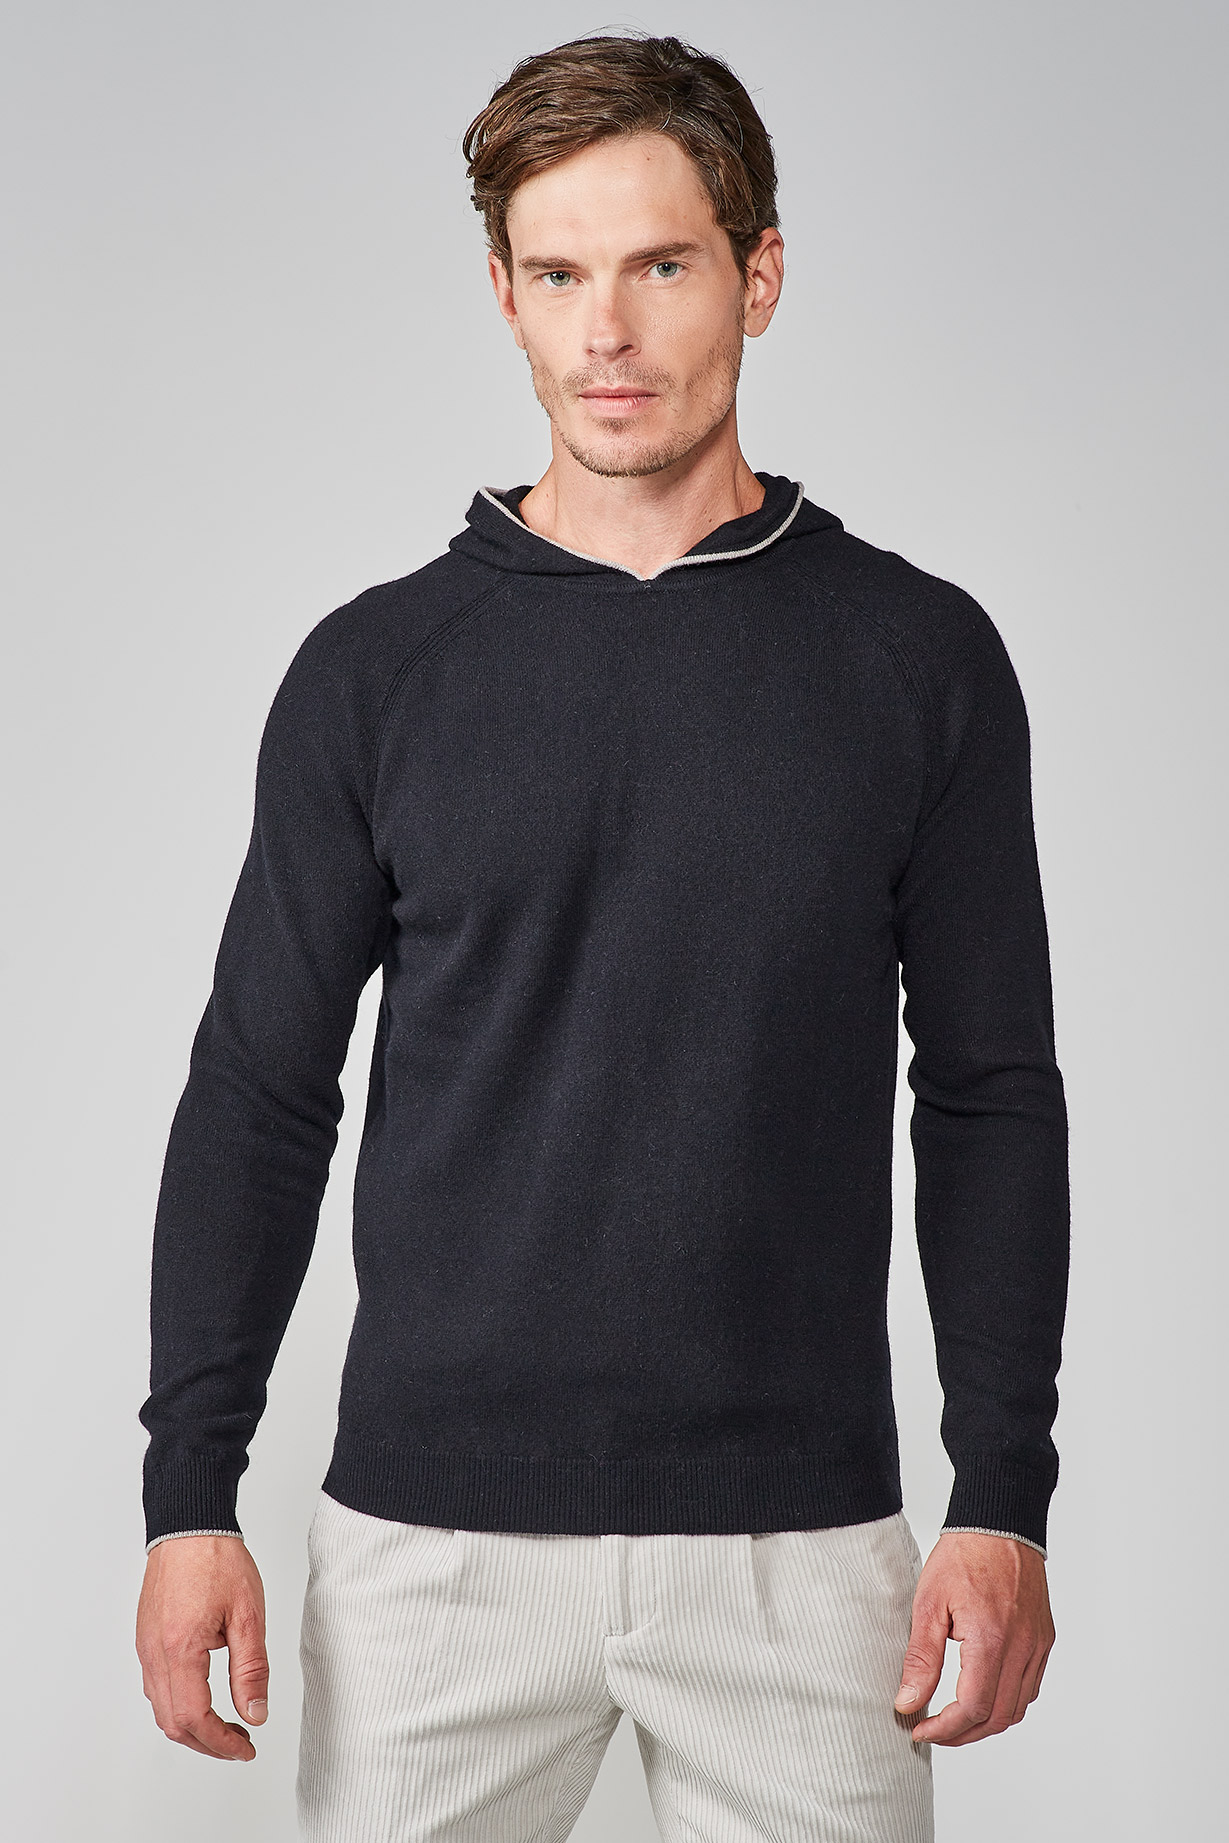 BLACK CASHMERE BLEND HOODED SWEATER